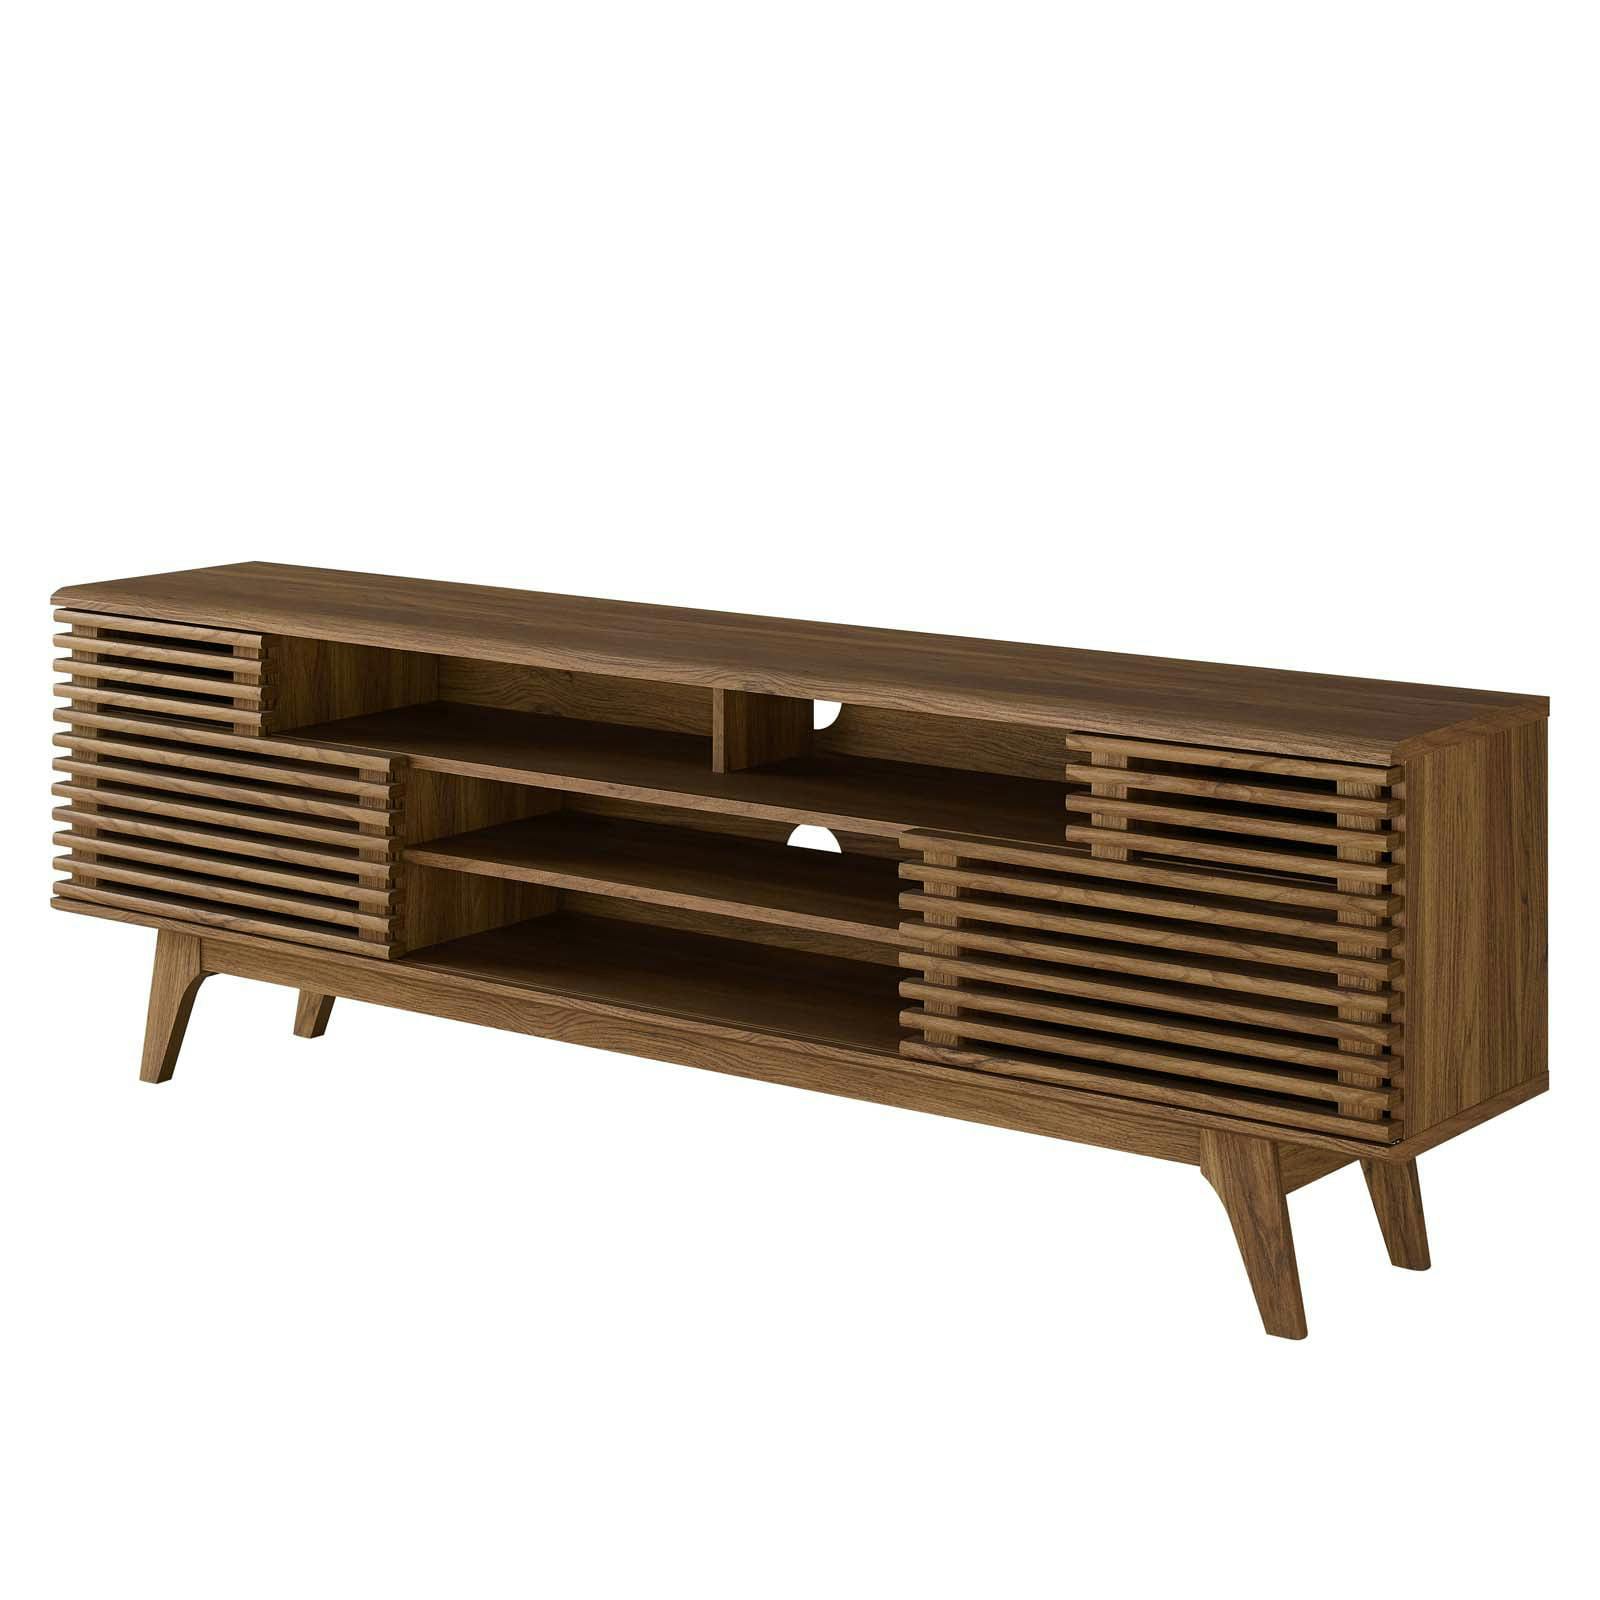 Mid-Century Walnut Media Console with Sliding Doors and Cable Management